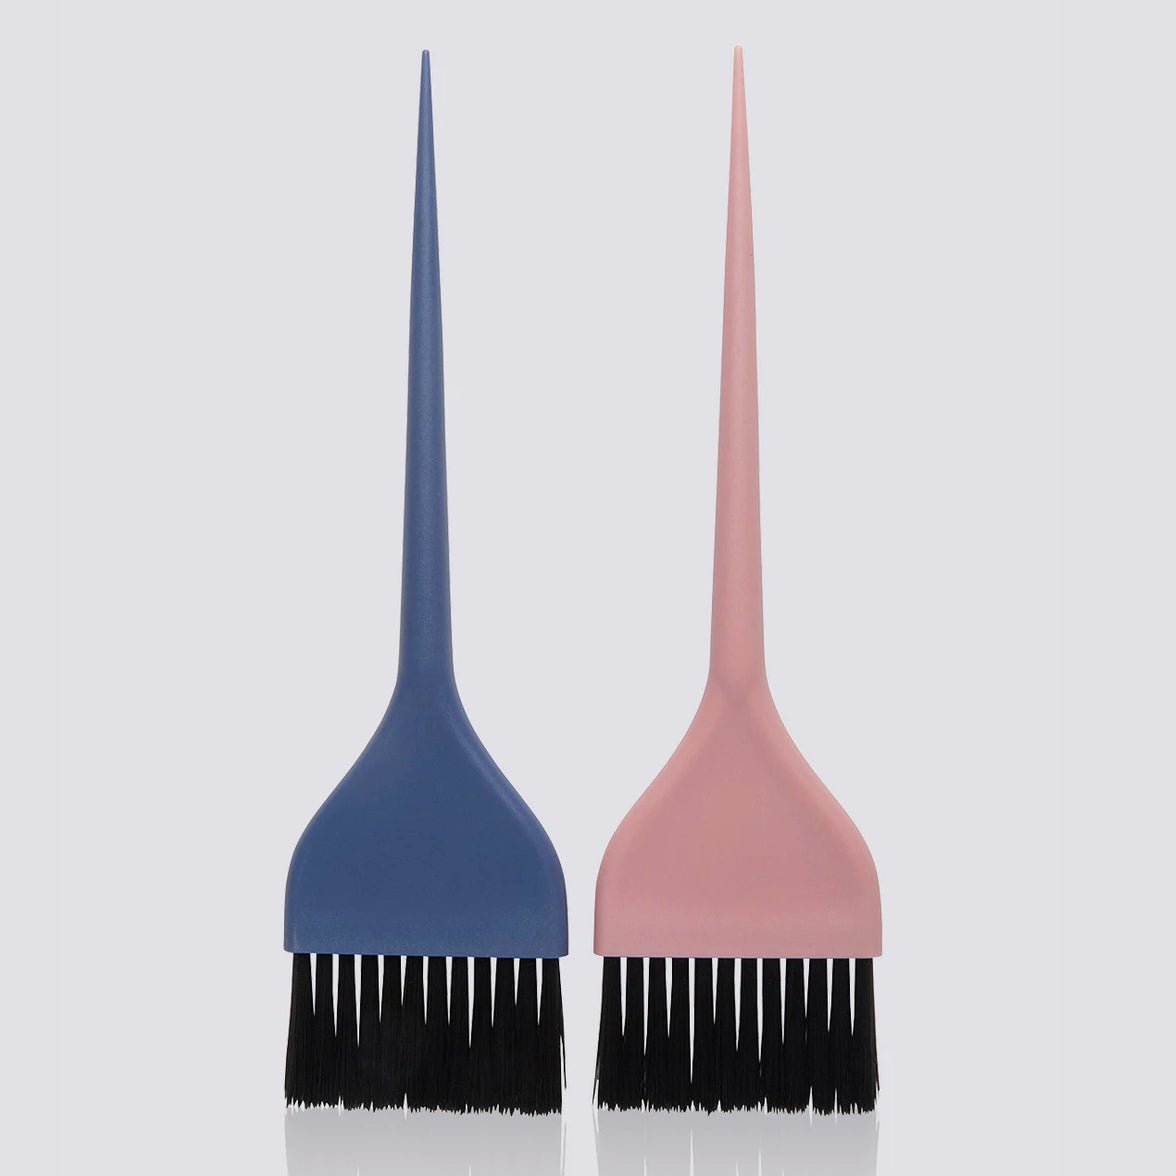 2 1/4" Soft Color Brushes | 2 PACK | F9408 | FROMM - SH Salons